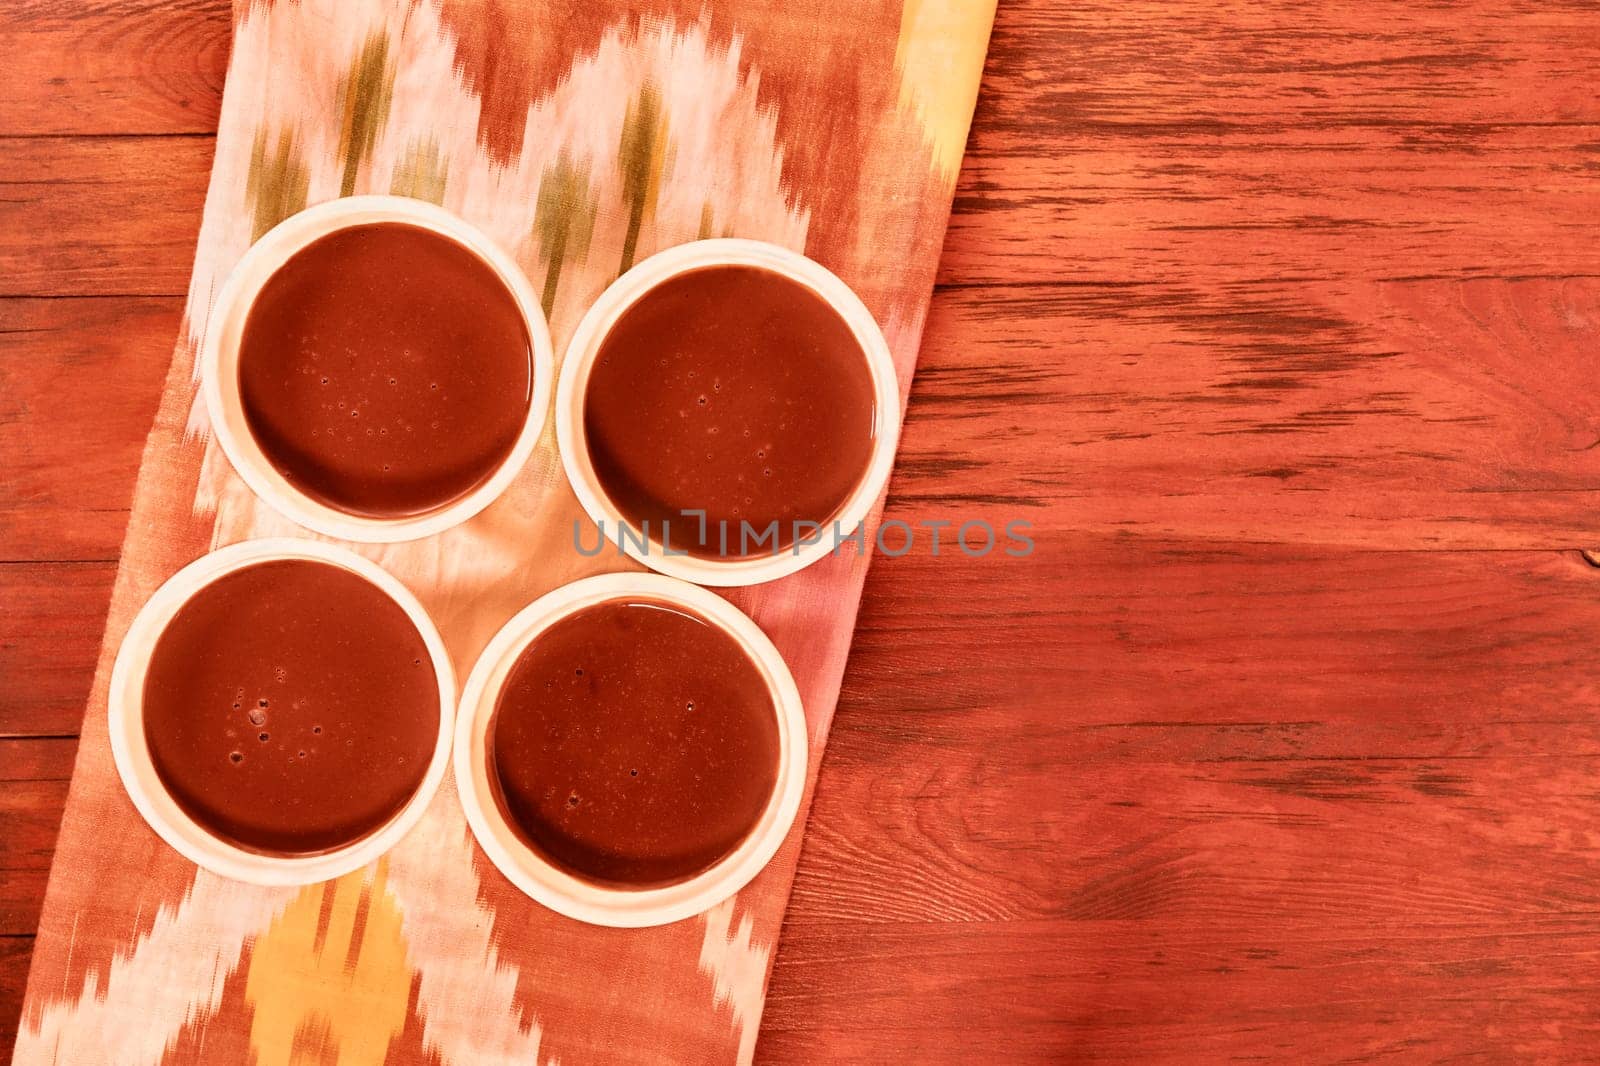 Four bowls with chocolate pudding on red wooden table